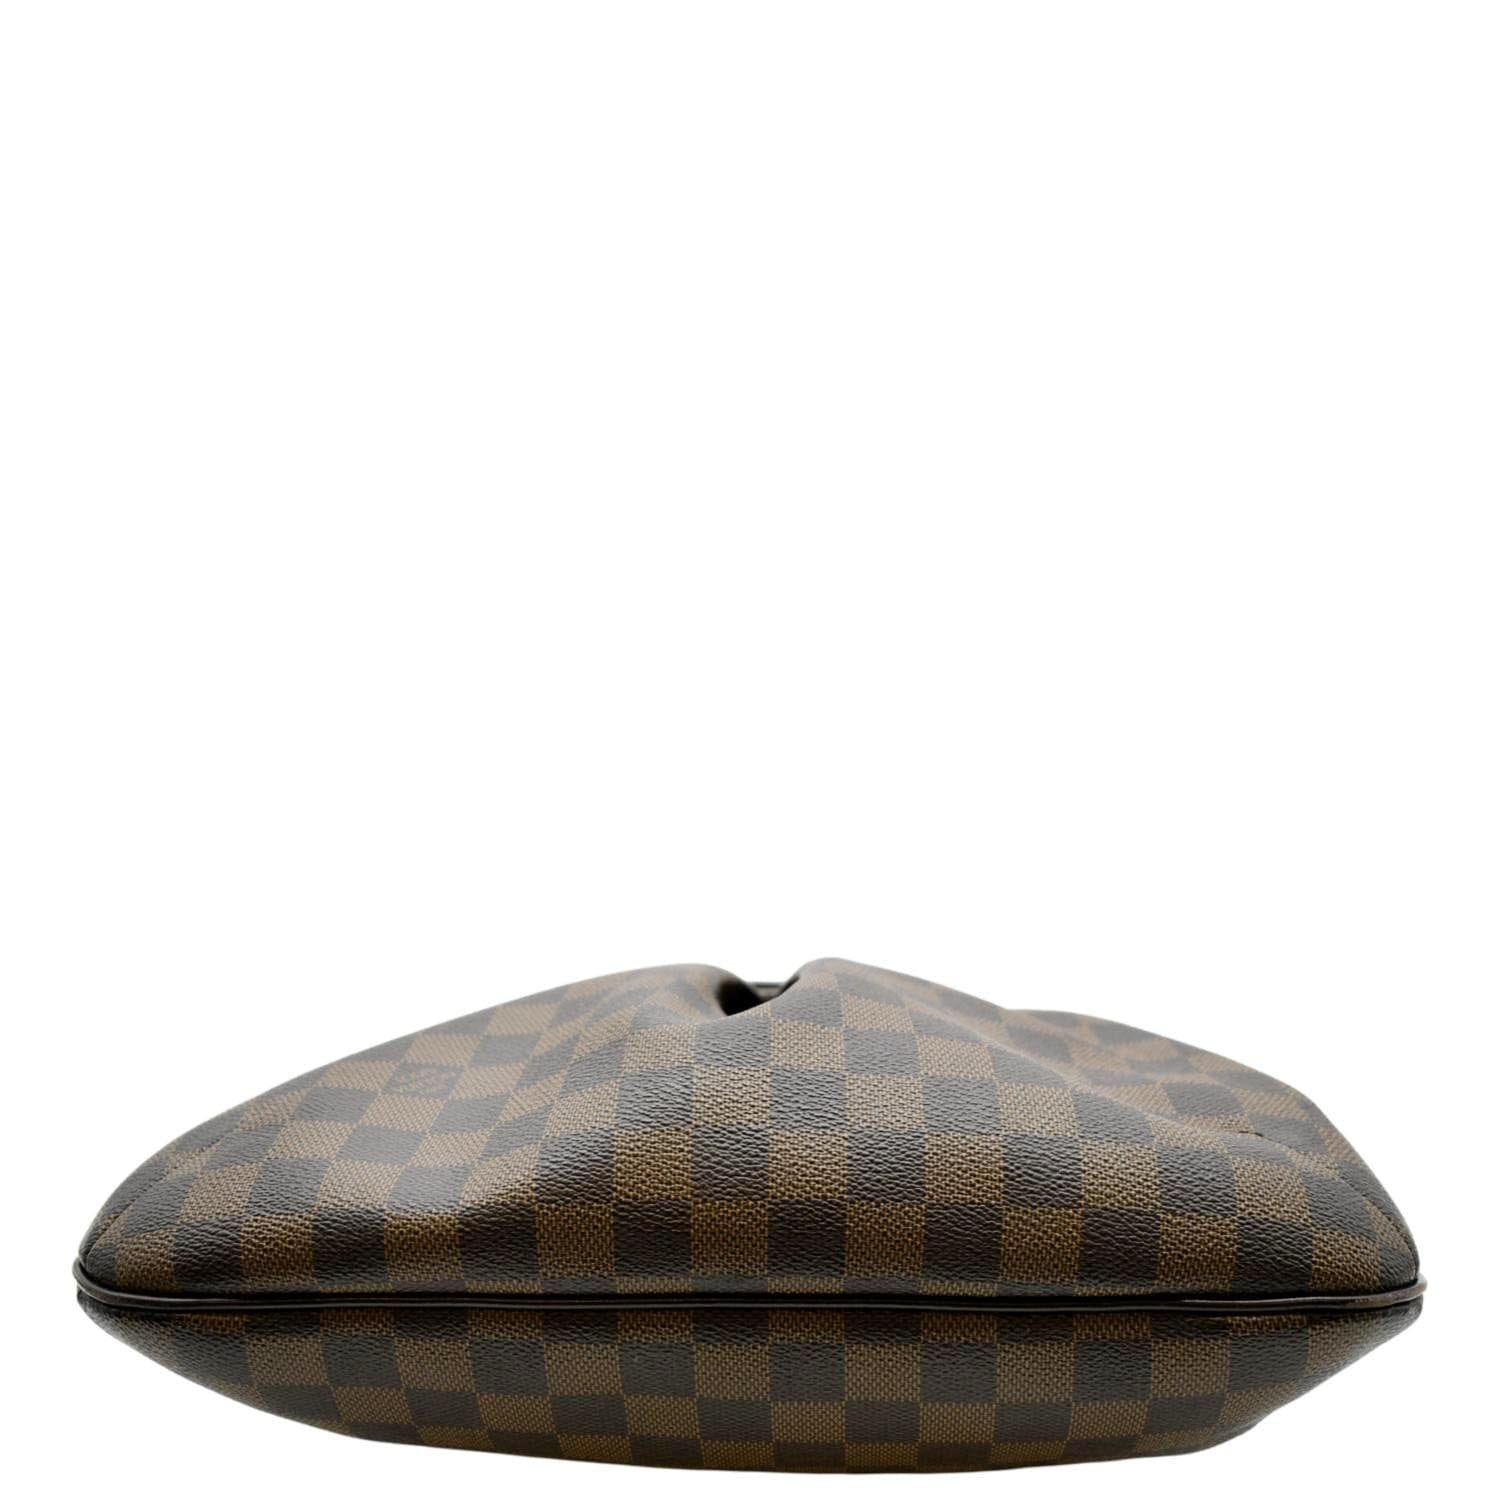 Louis Vuitton lv bloomsbury damier canvas crossbody Brown - $1000 (21% Off  Retail) - From brianna